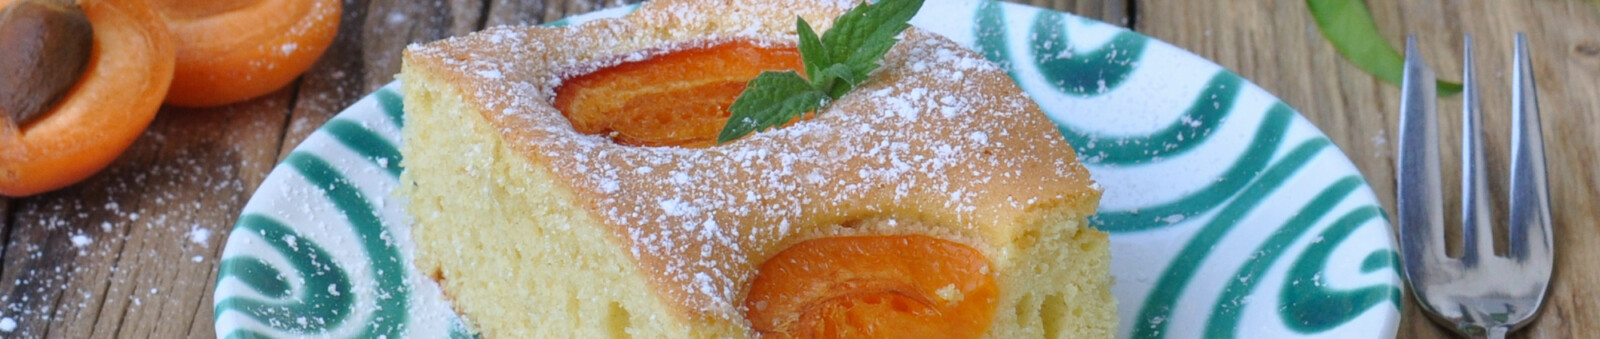     Several slices of an apricots cake 